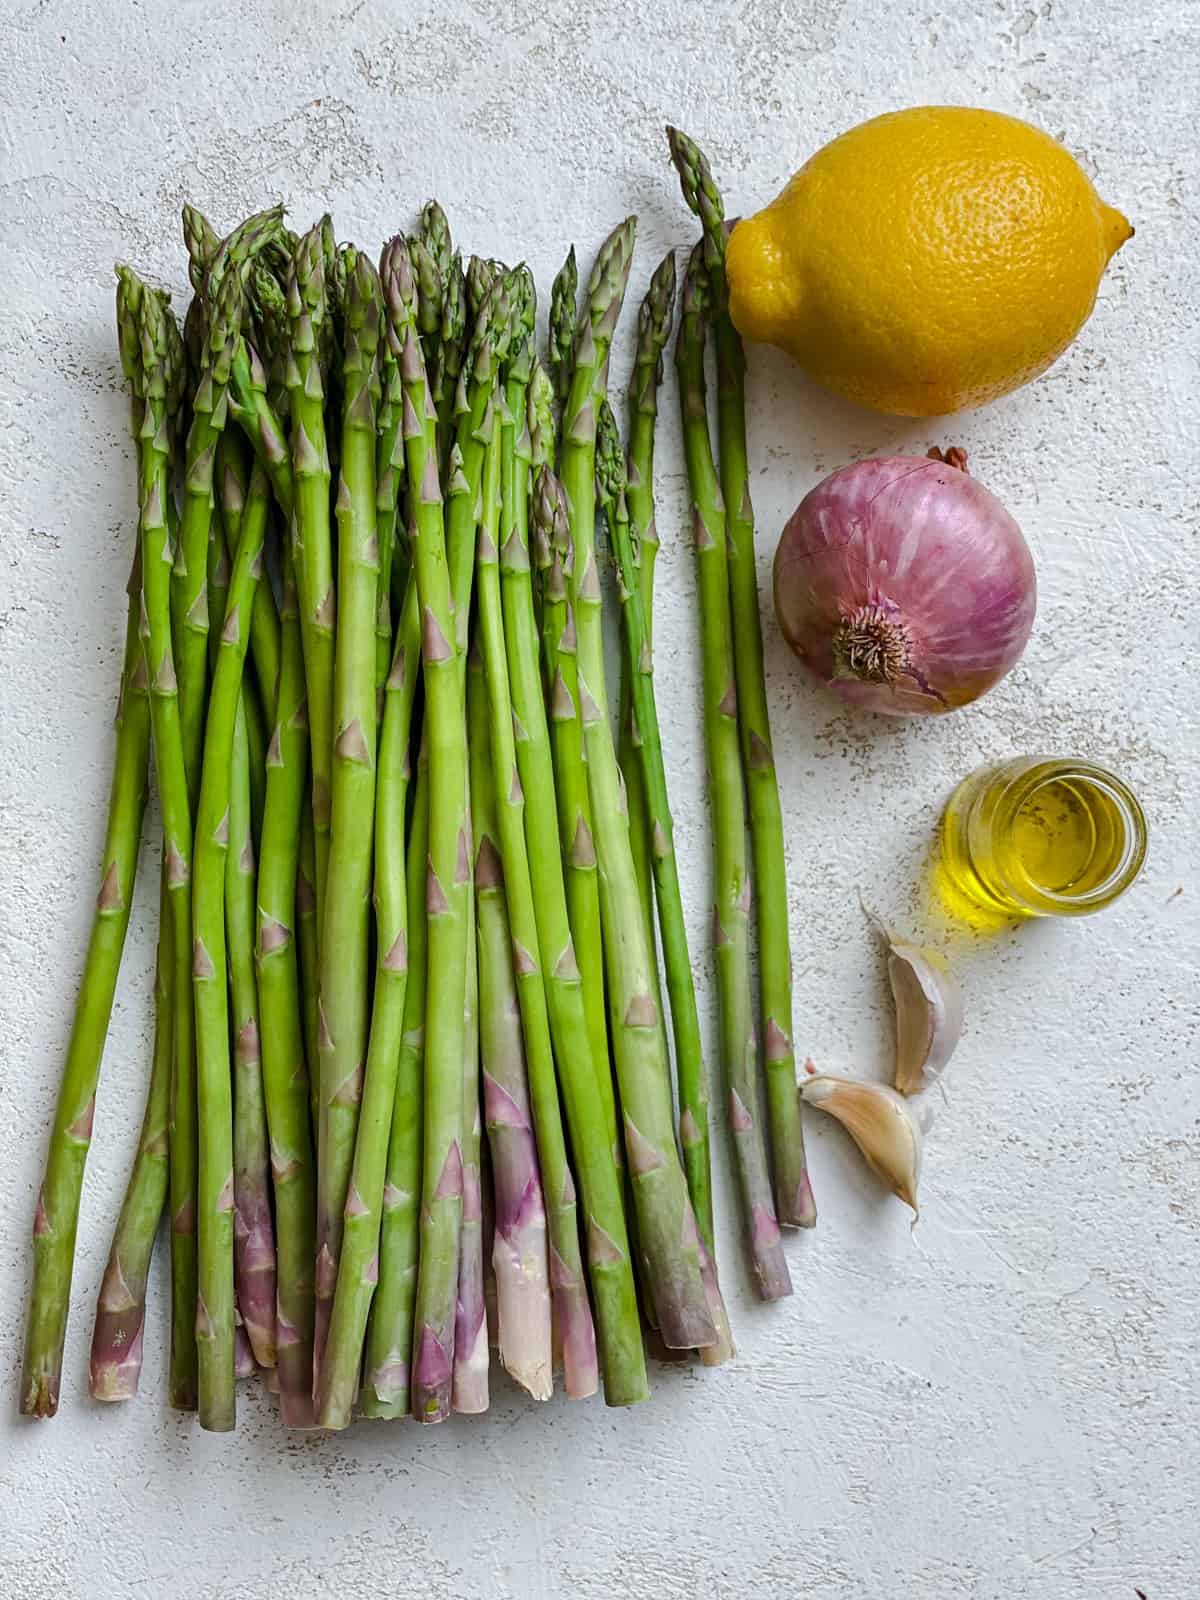 Ingredients for sautéed asparagus with lemon and garlic measured on a white surface